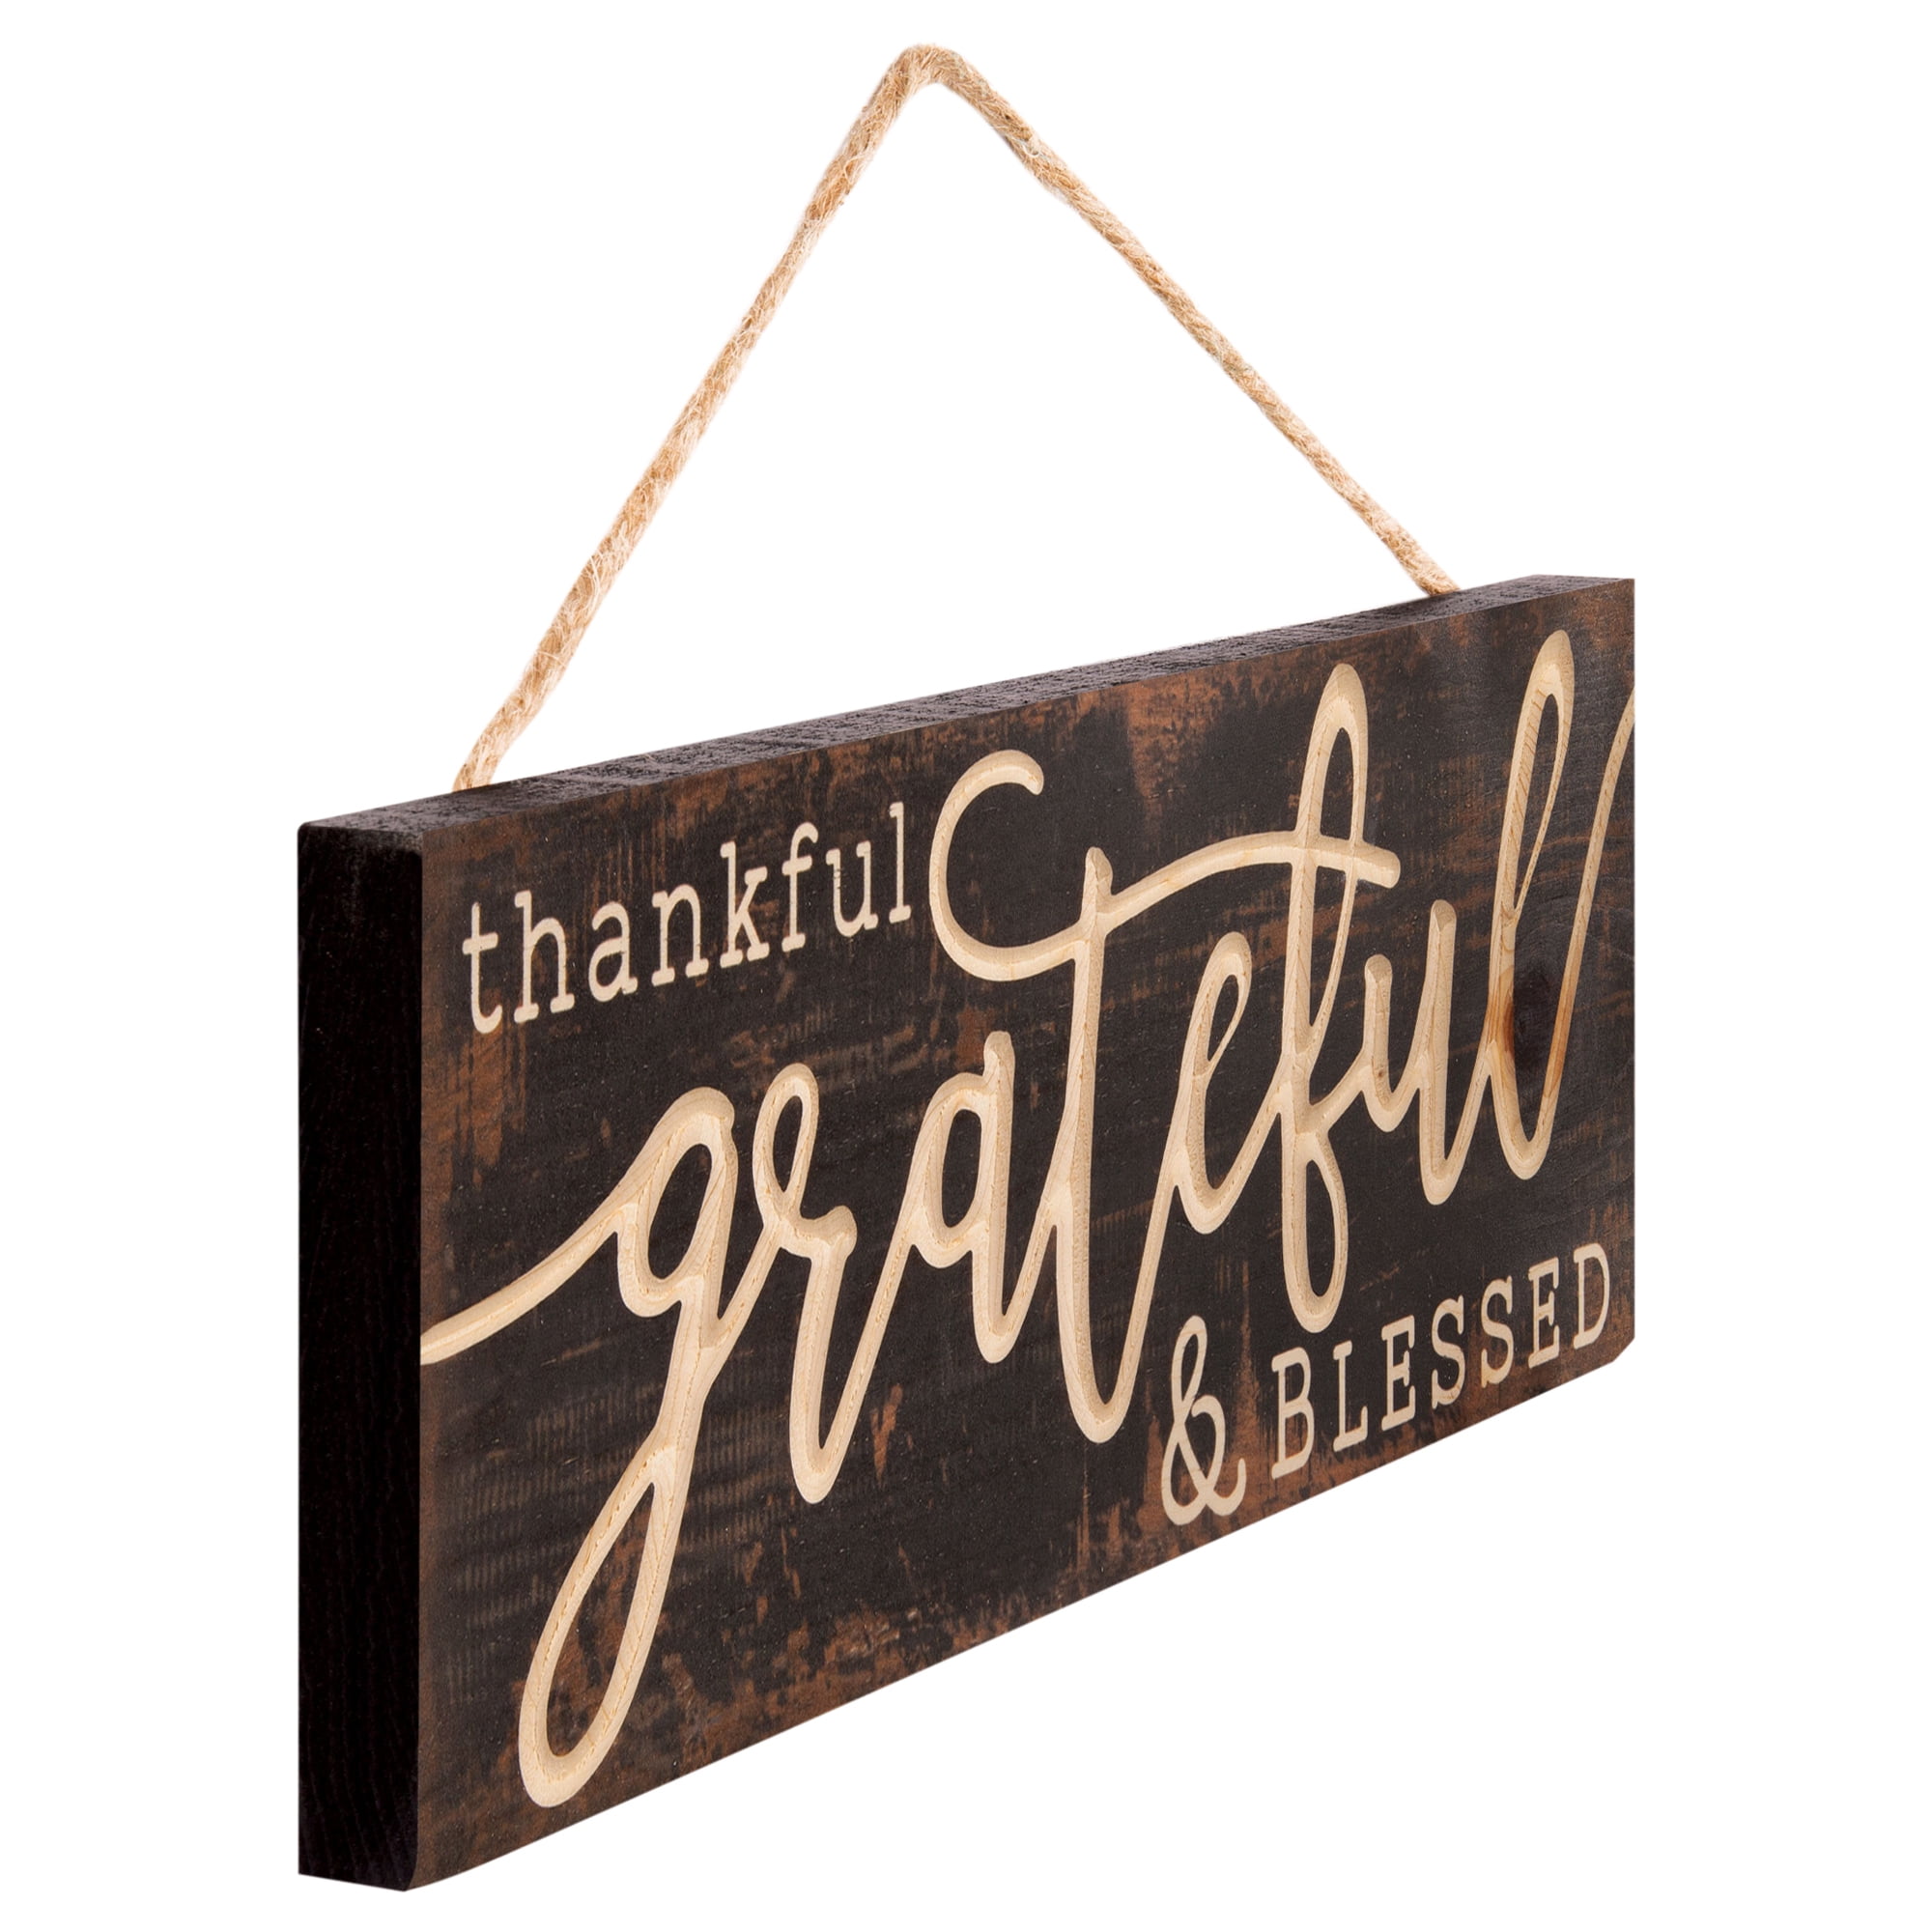 Thankful Grateful Blessed Weathered Brown 16x6" Pine Wood Carved Hanging Sign 